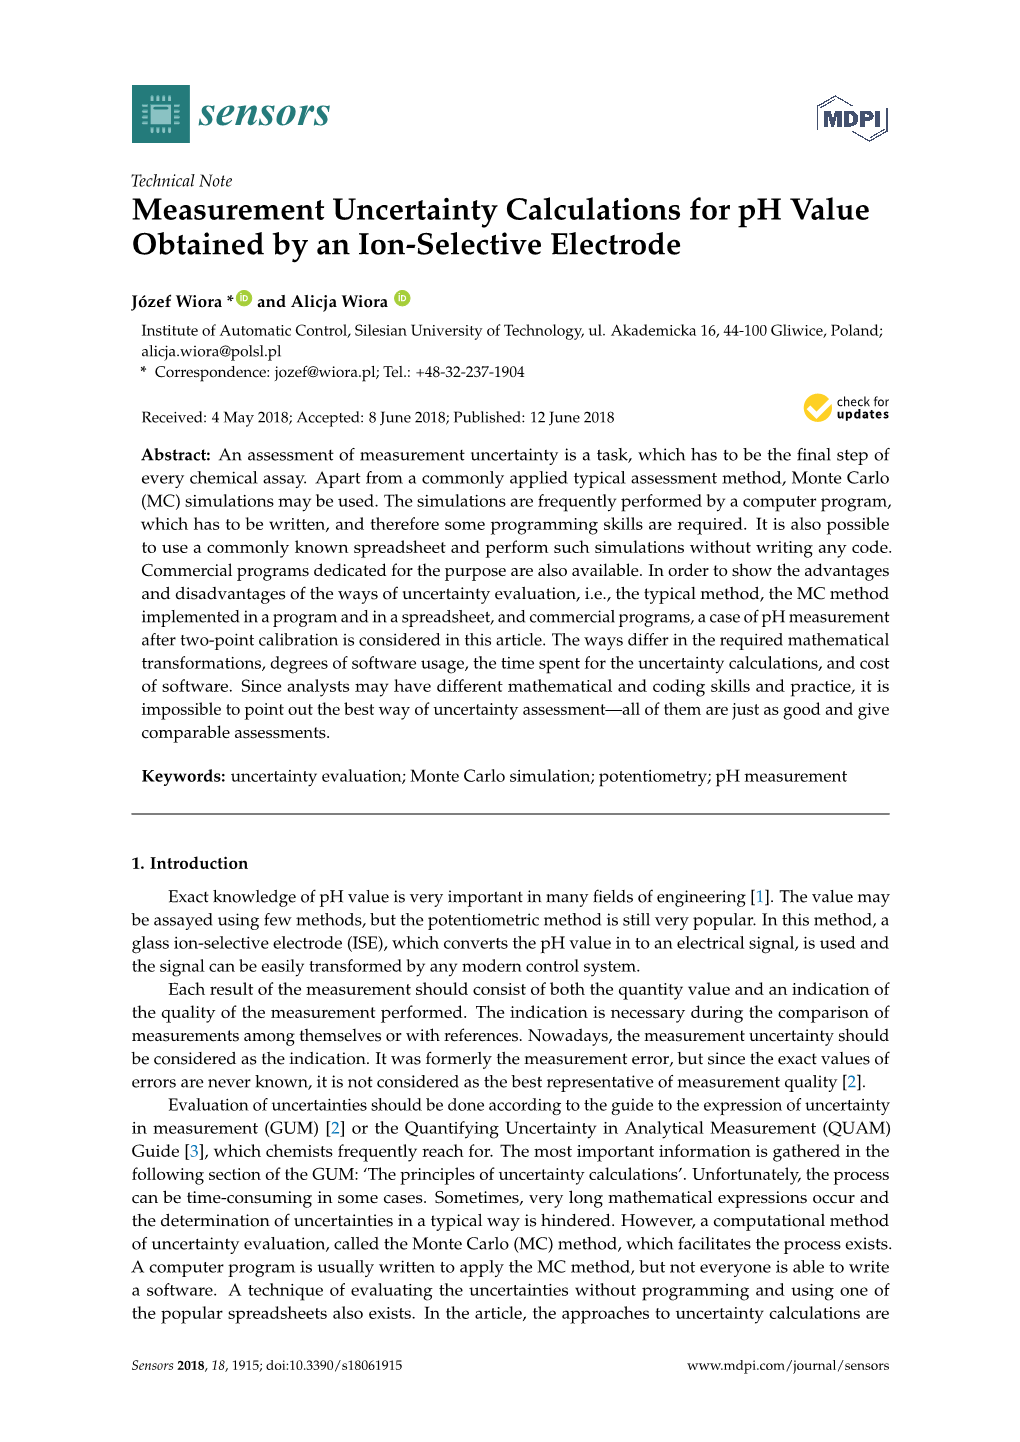 Measurement Uncertainty Calculations for Ph Value Obtained by an Ion-Selective Electrode